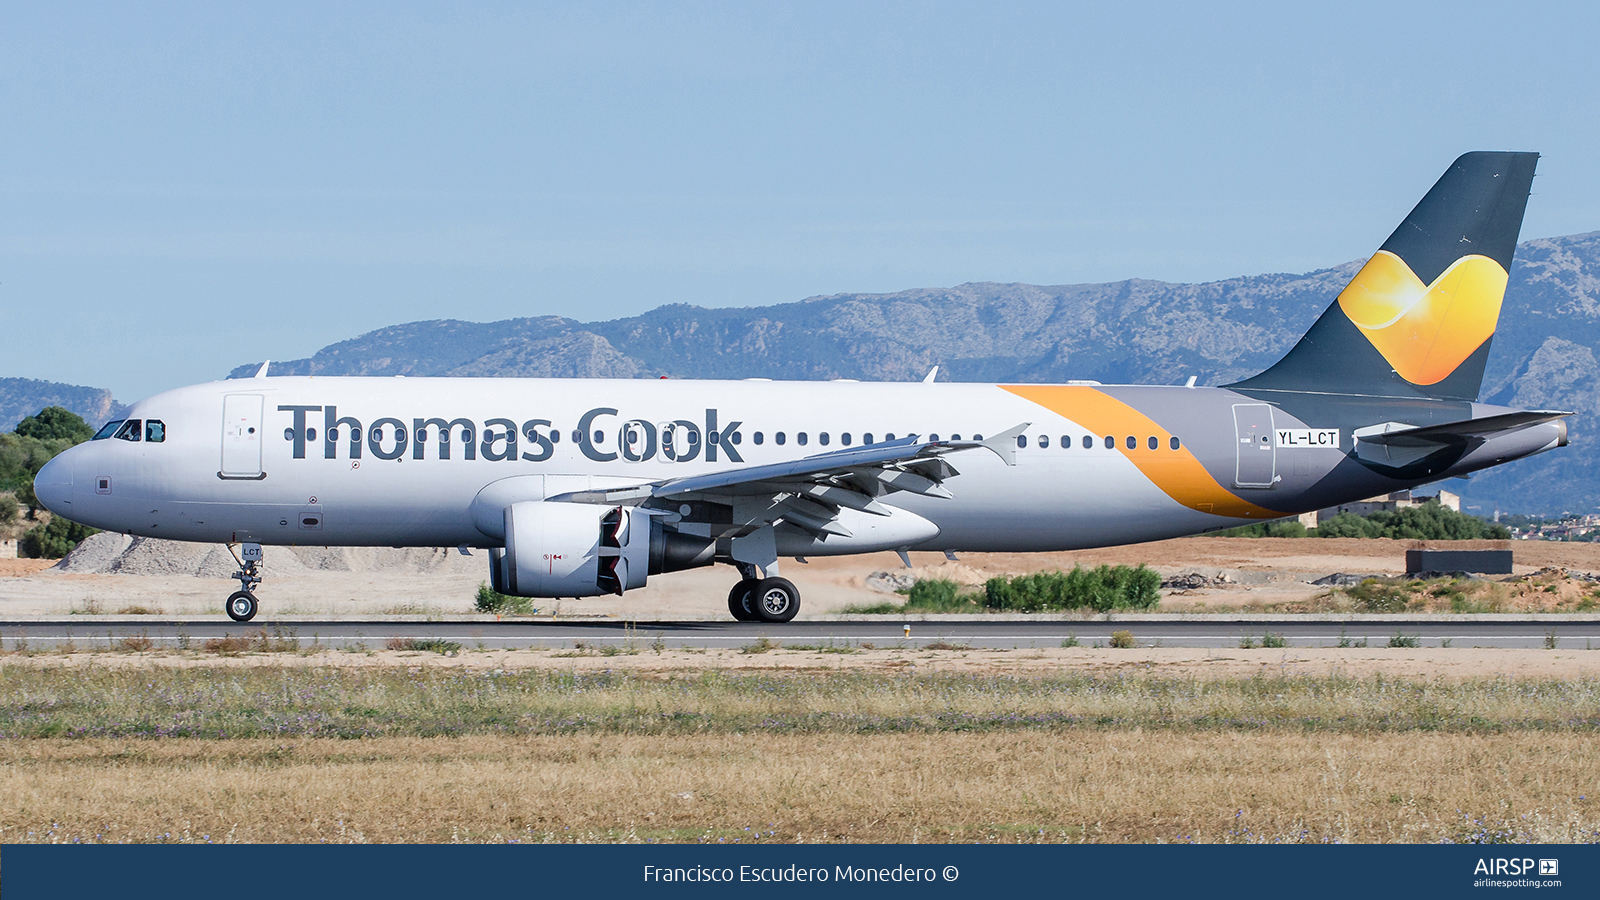 Thomas Cook Airlines  Airbus A320  YL-LCT